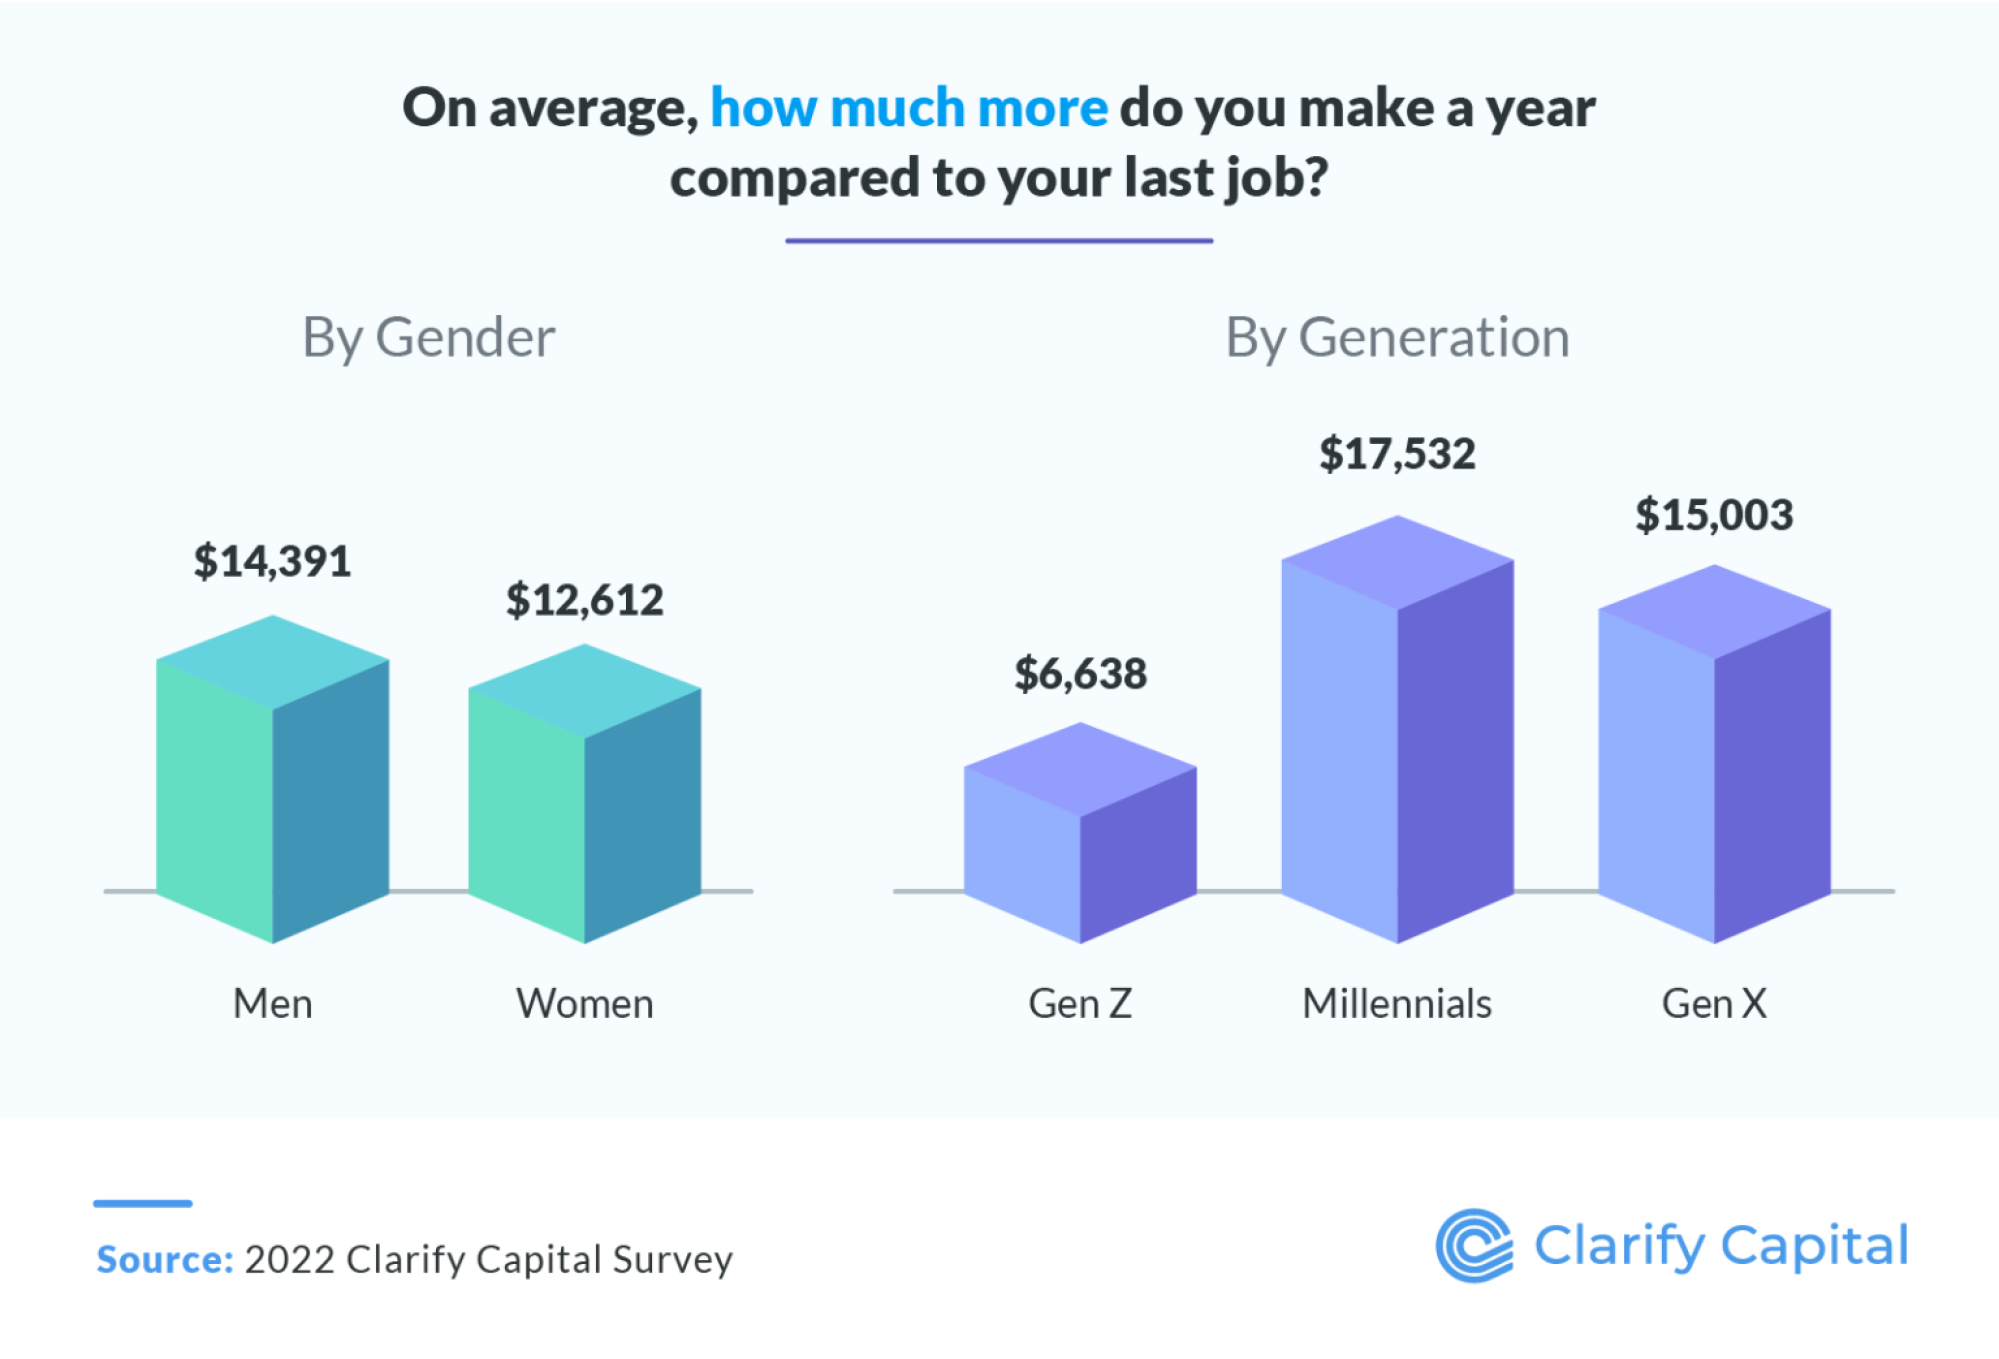 A chart showing annual income increases. About $14,000 for men, and $1,300 for women. For Gen-Z about $7,000 more, for millennials about 18,000 more, and for Gen-X about $15,00 more